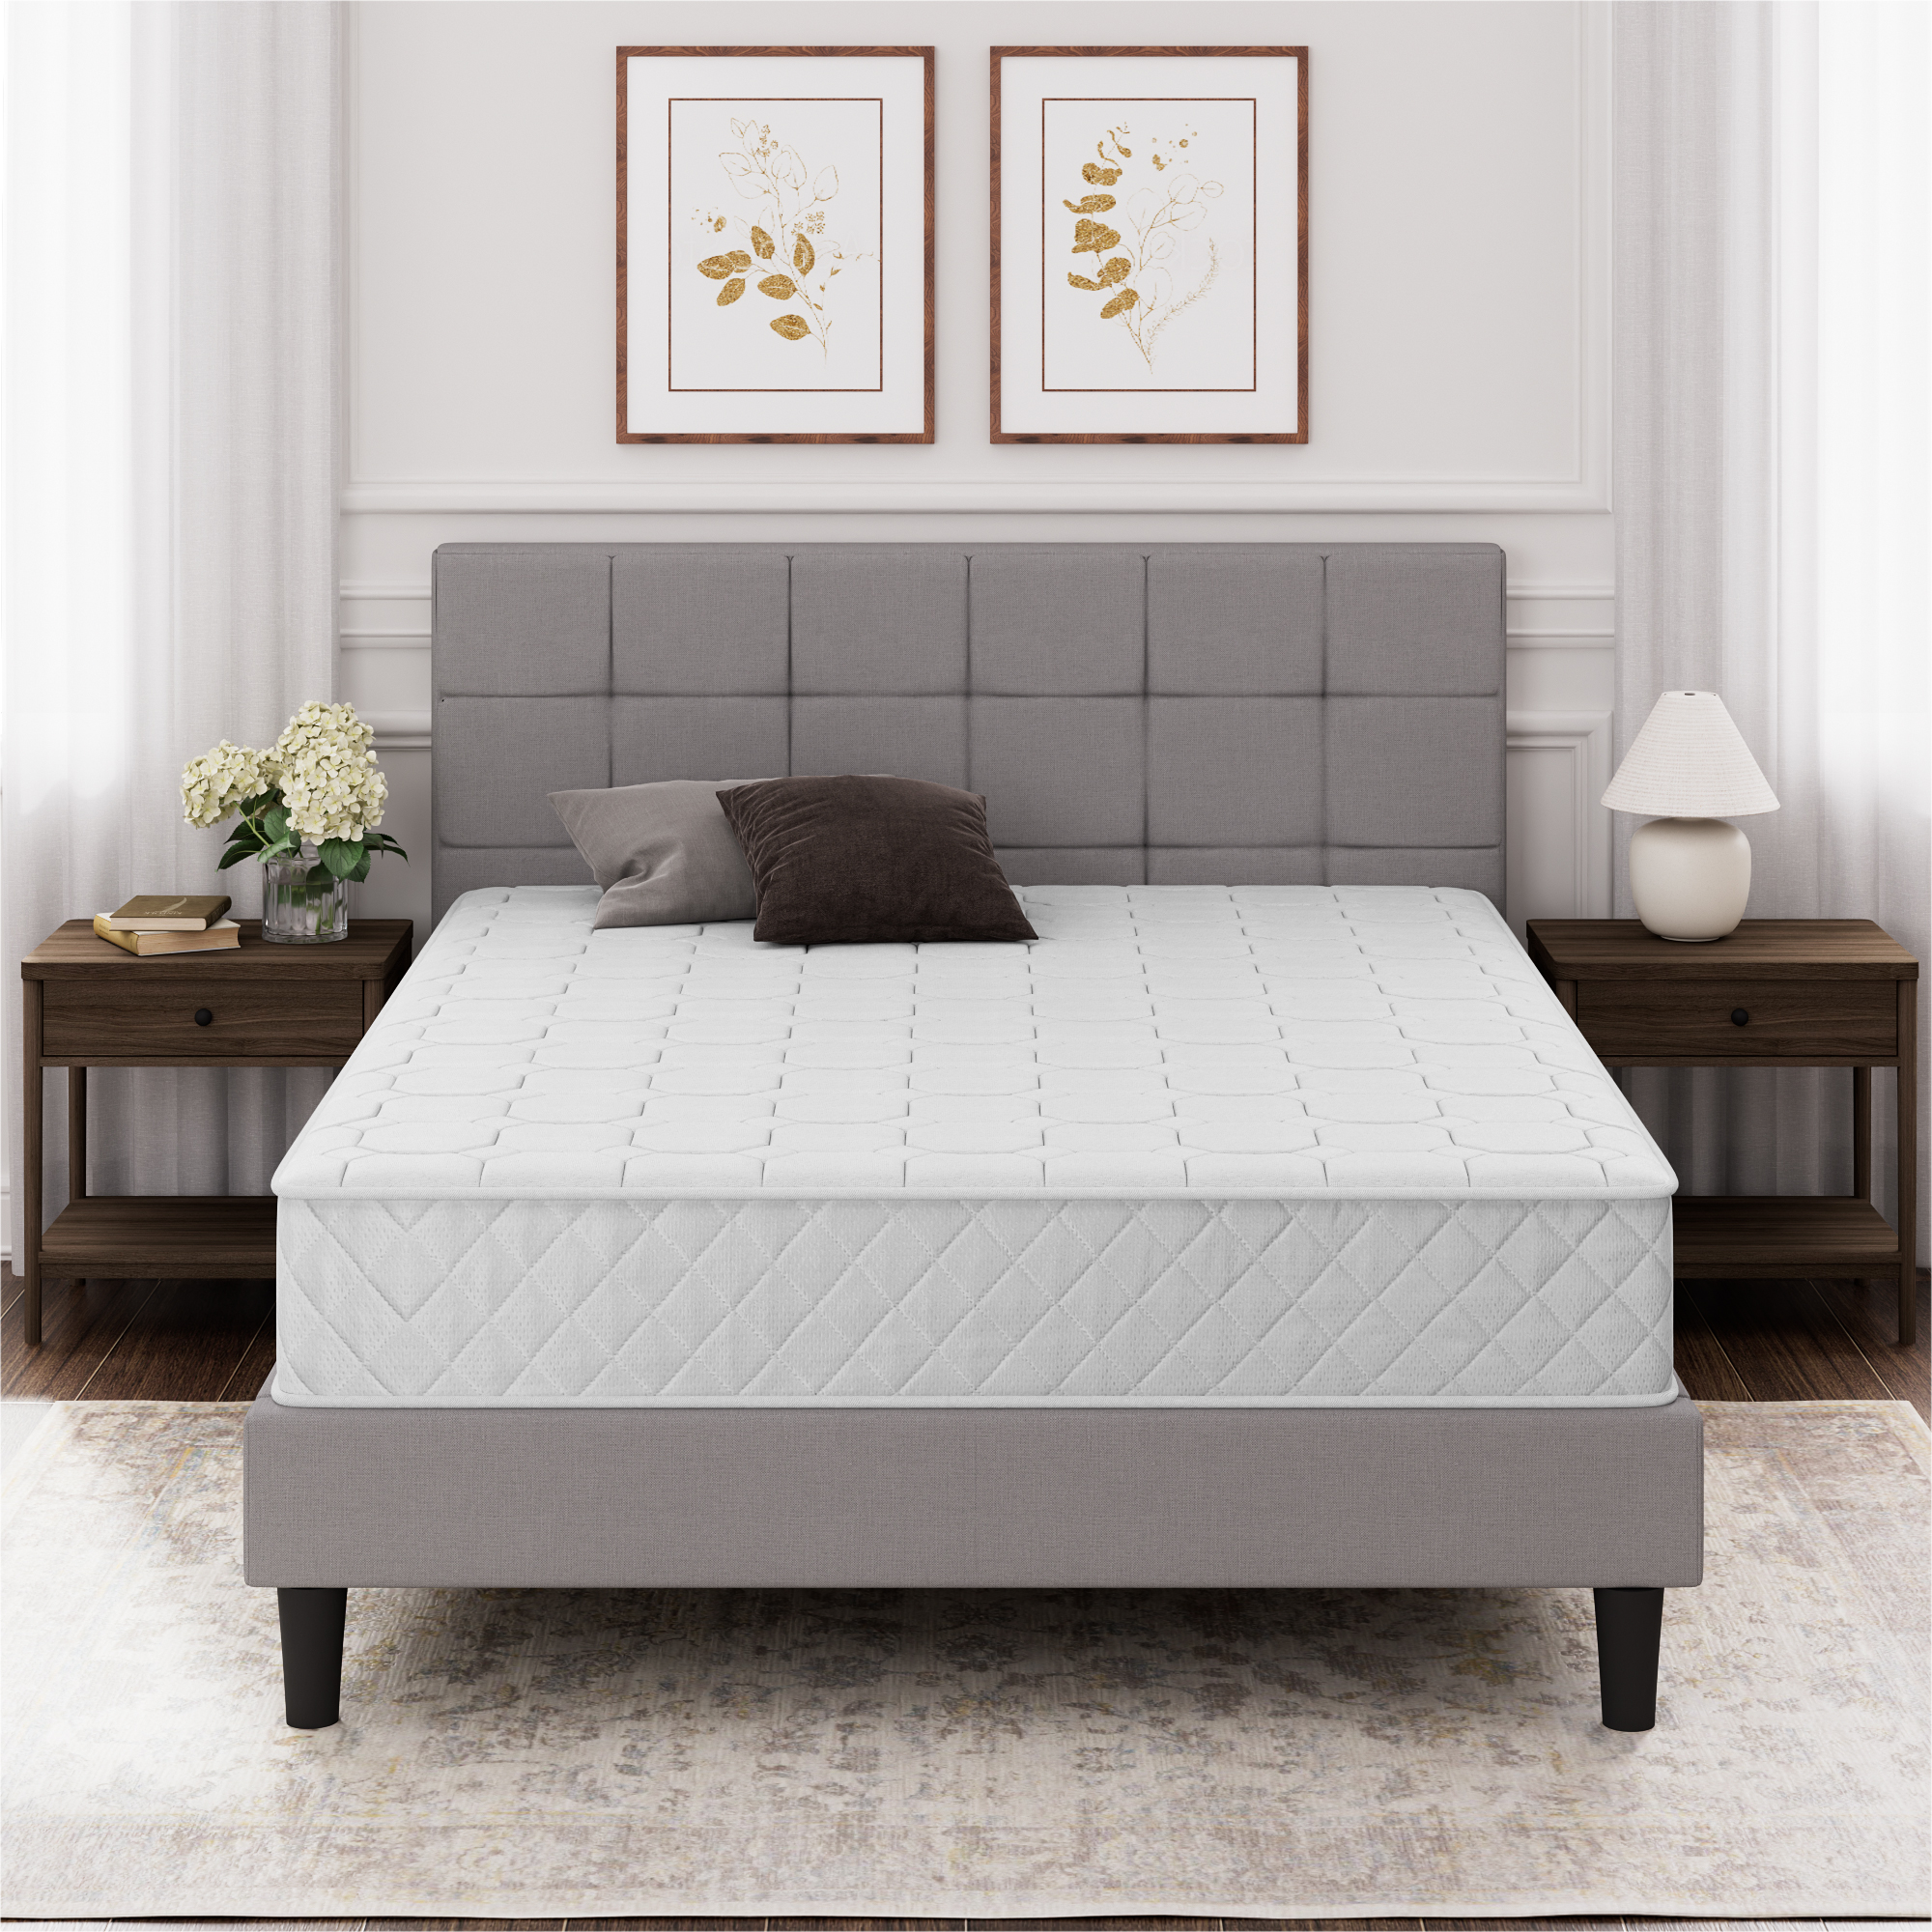 Zinus 8" Quilted Hybrid Mattress of Comfort Foam and Pocket Spring, Adult, Queen - image 2 of 9